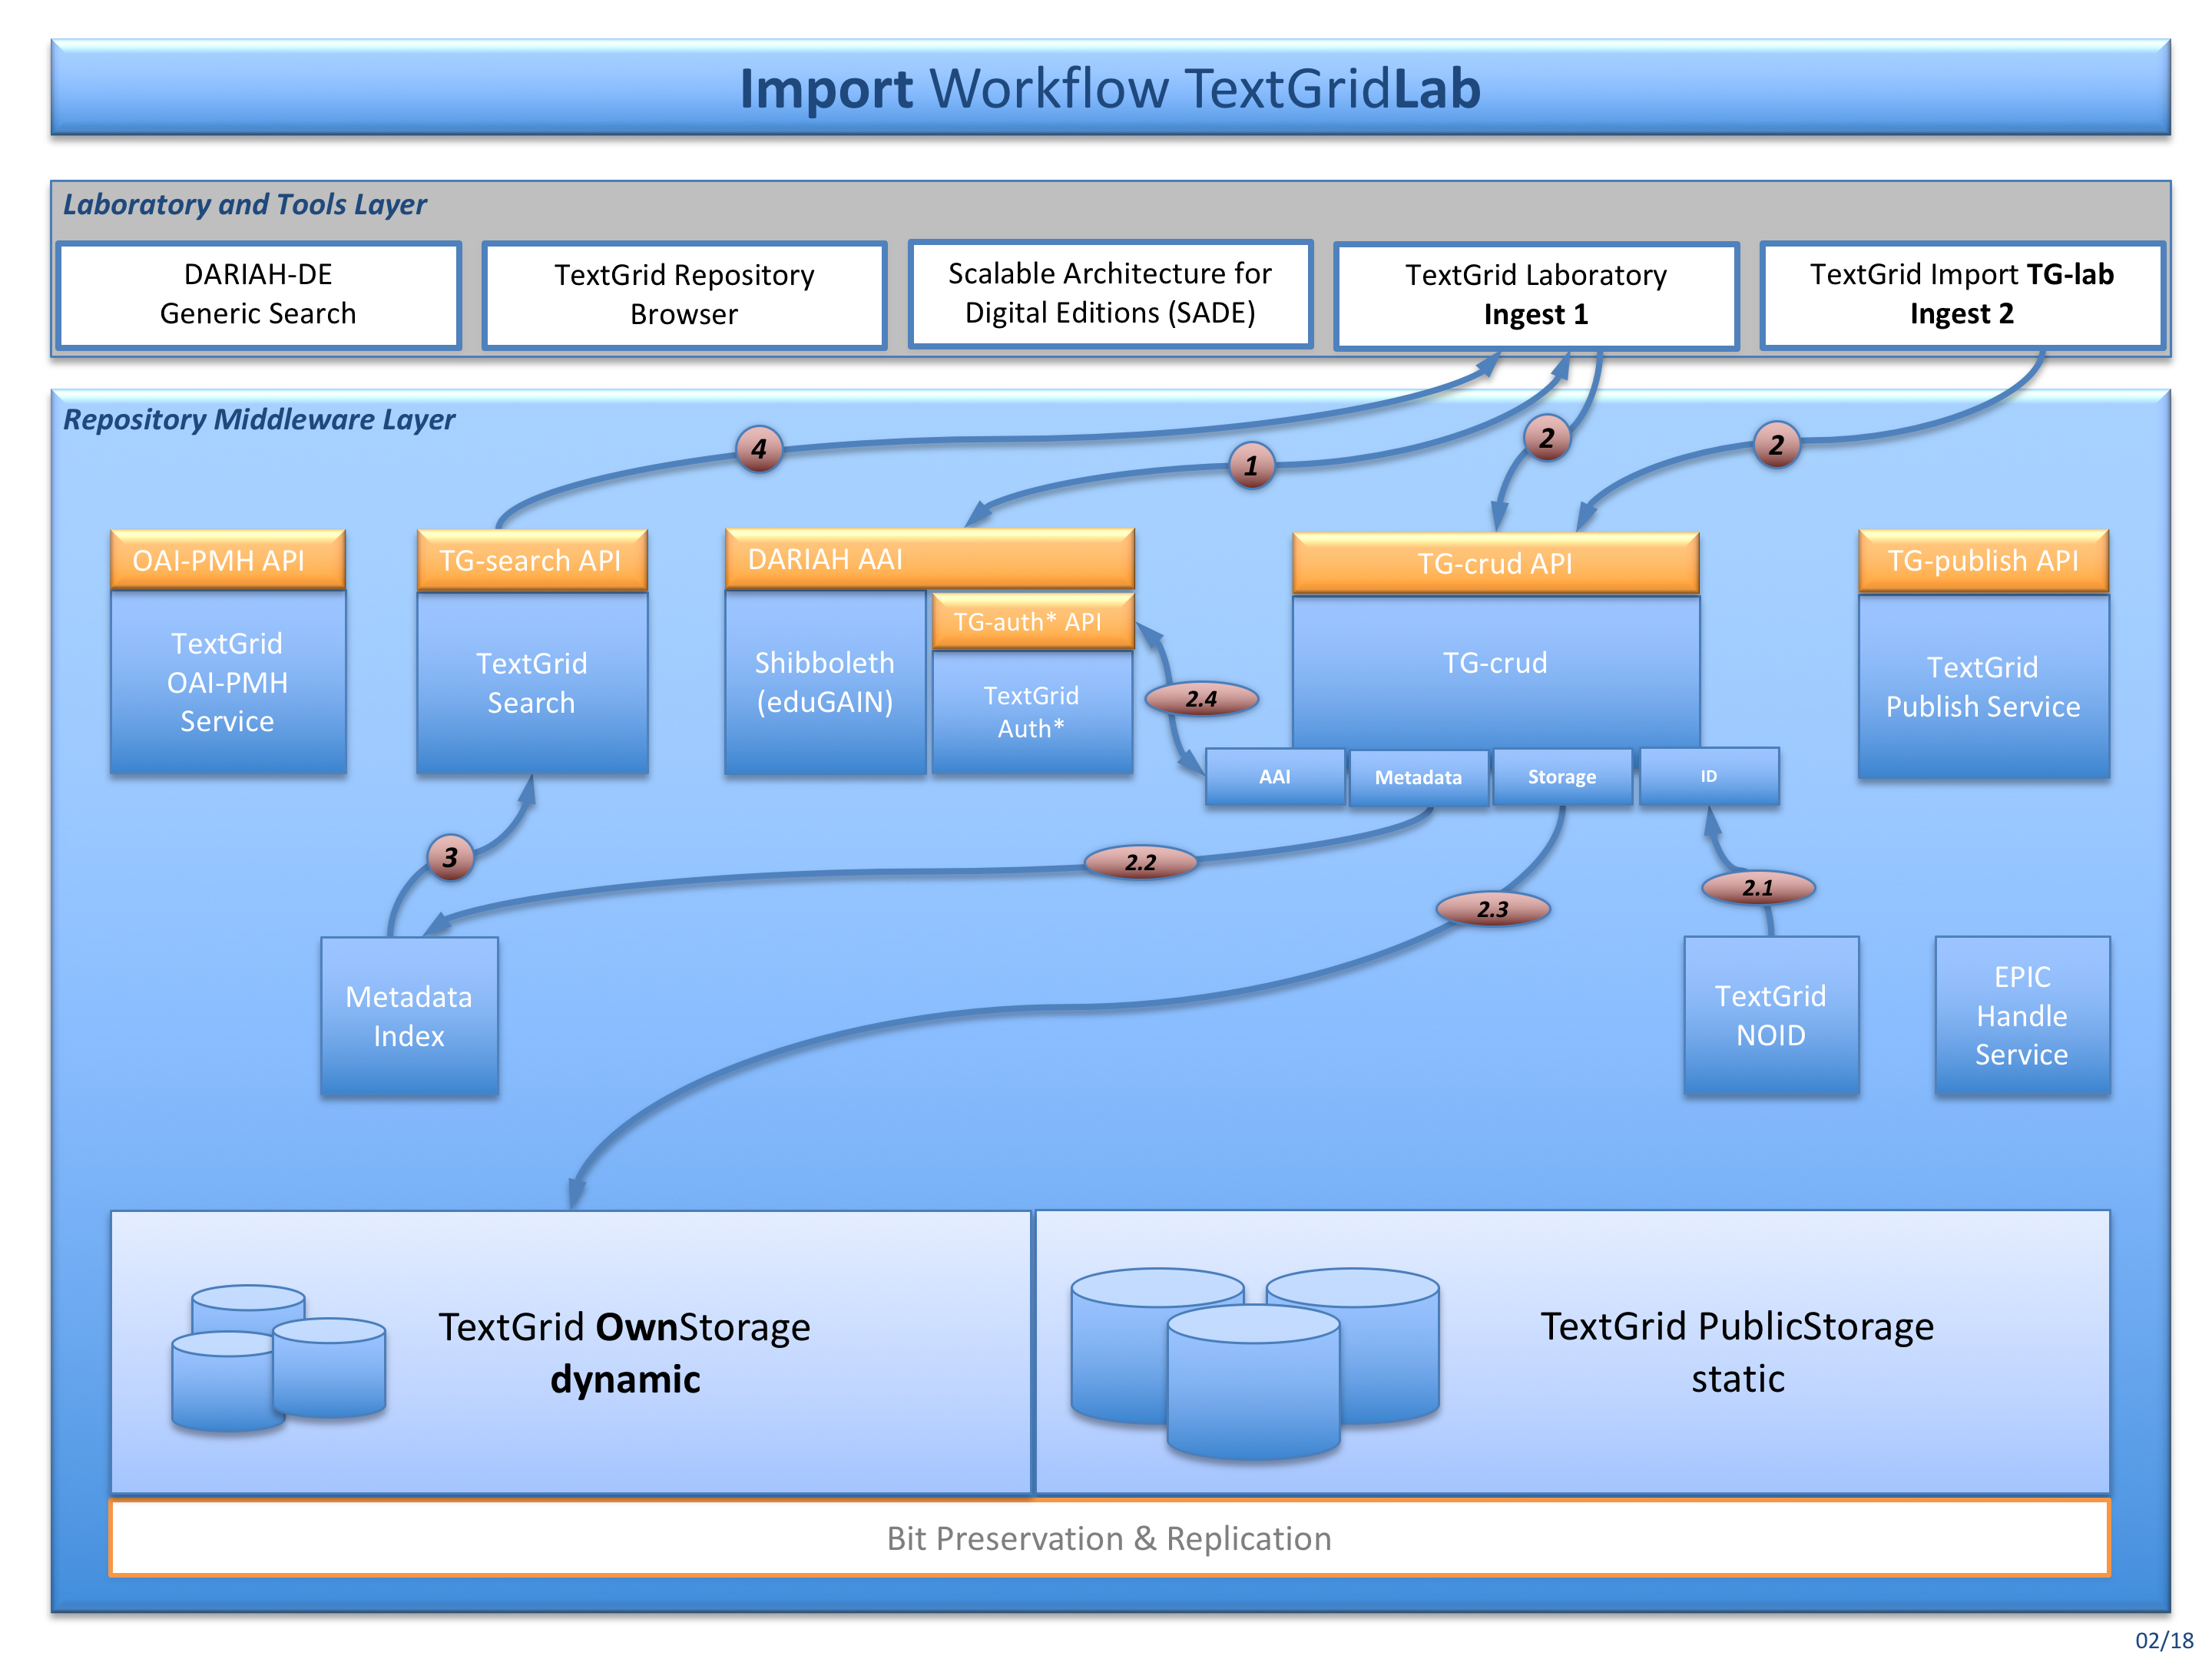 Fig. 2: The import workflow for ingesting data into the TextgridLab (Ingest 1)